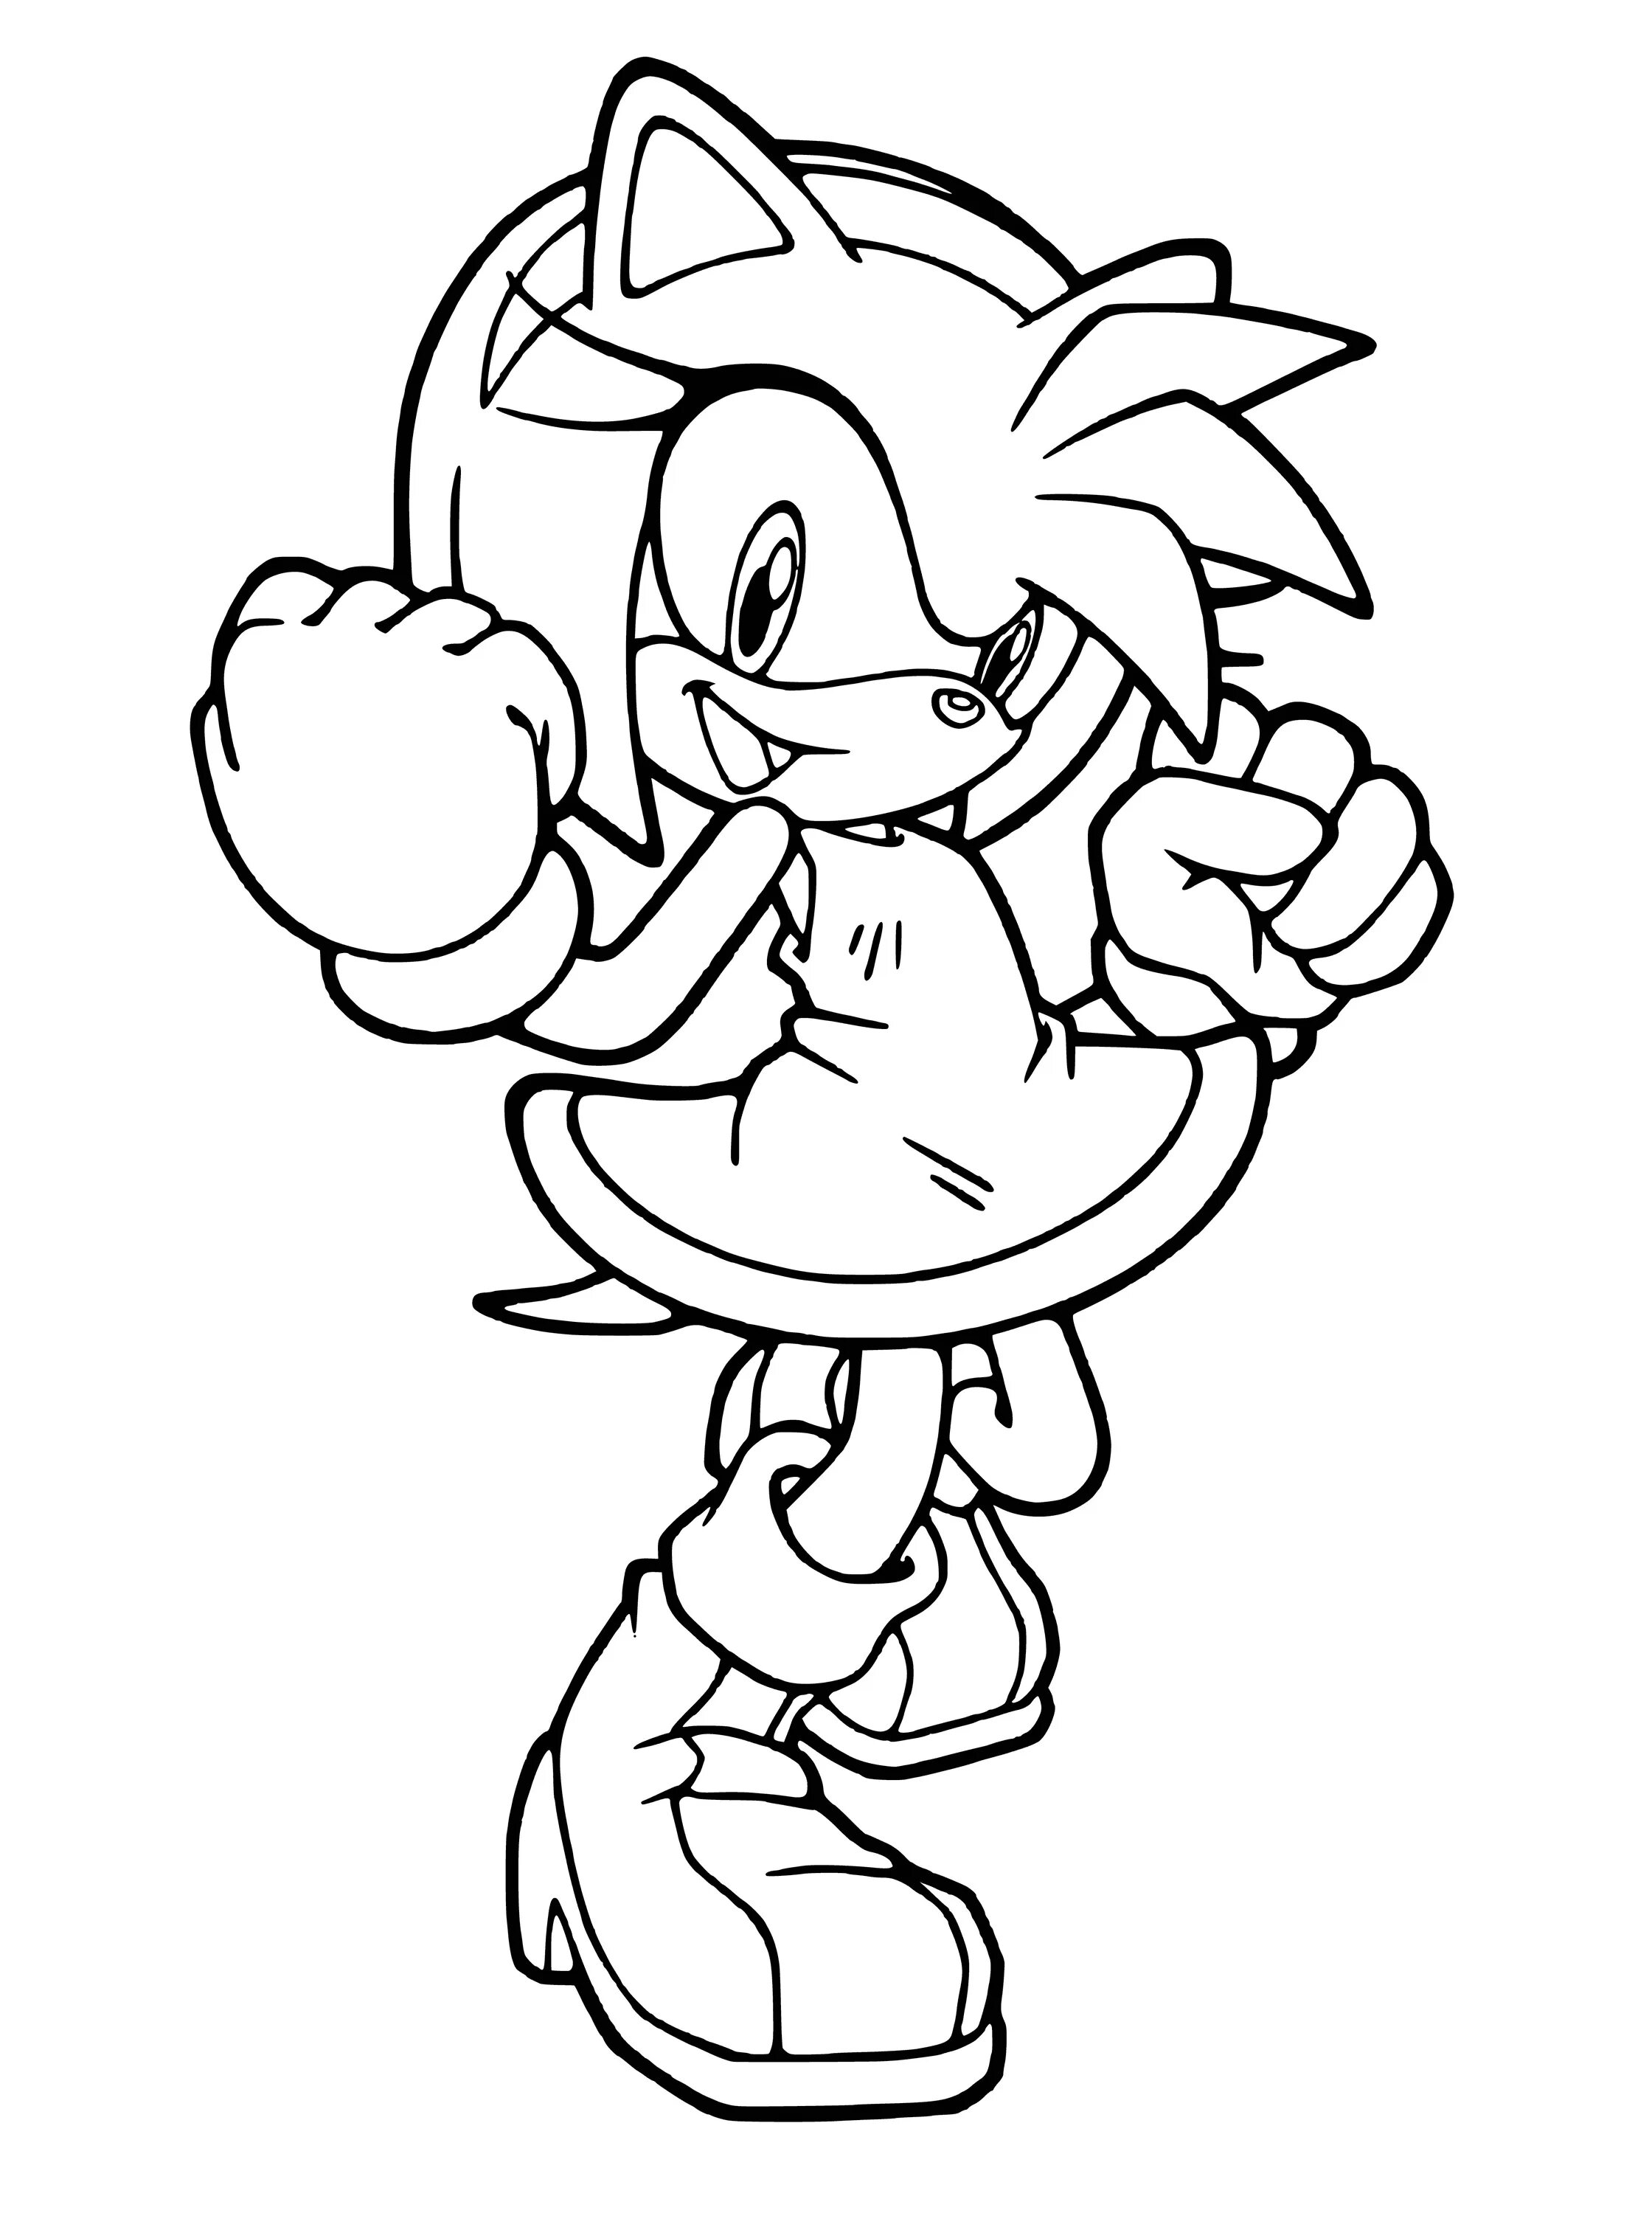 Coloring page jubilant amy